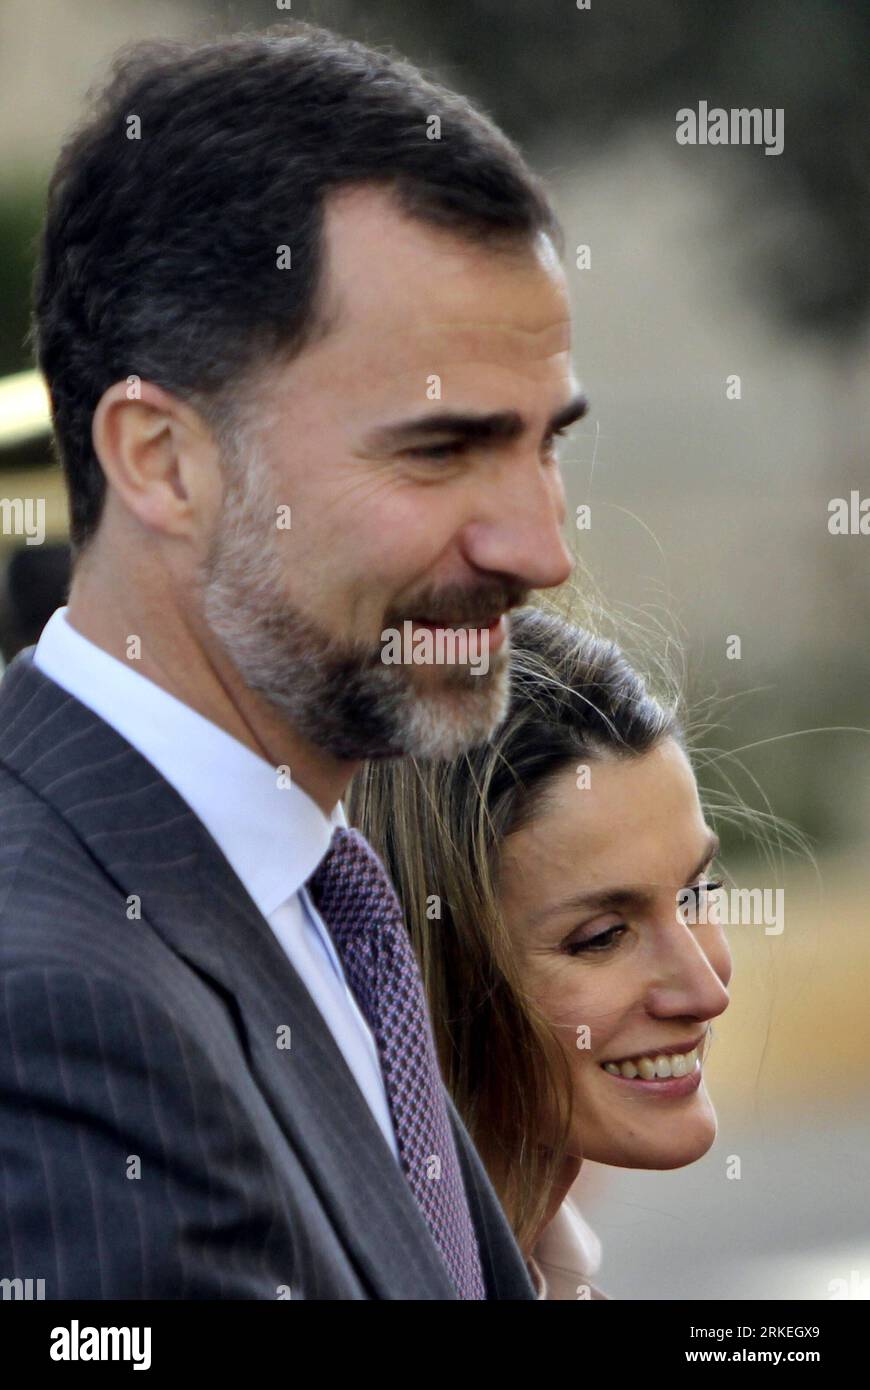 Bildnummer: 55255938  Datum: 12.04.2011  Copyright: imago/Xinhua (110412)-- WEST BANK, APRIL 12, 2011 (Xinhua) -- Spanish Crown Prince Felipe de Borbon(2nd L) and Princess Letizia chat with Palestinian President during a farewell ceremony after their meeting in the West Bank city of Ramallah, on April 12, 2011. Felipe and his wife Princess Letizia were in a short visit to the region. (Xinhua/Fadi Arouri) MIDEAST-WEST BANK-SPAIN-CROWN-PRINCE-FELIPE PUBLICATIONxNOTxINxCHN Entertainment People Adel Königshaus ESP kbdig xkg 2011 hoch  o0 Frau, Ehefrau, Familie    Bildnummer 55255938 Date 12 04 201 Stock Photo